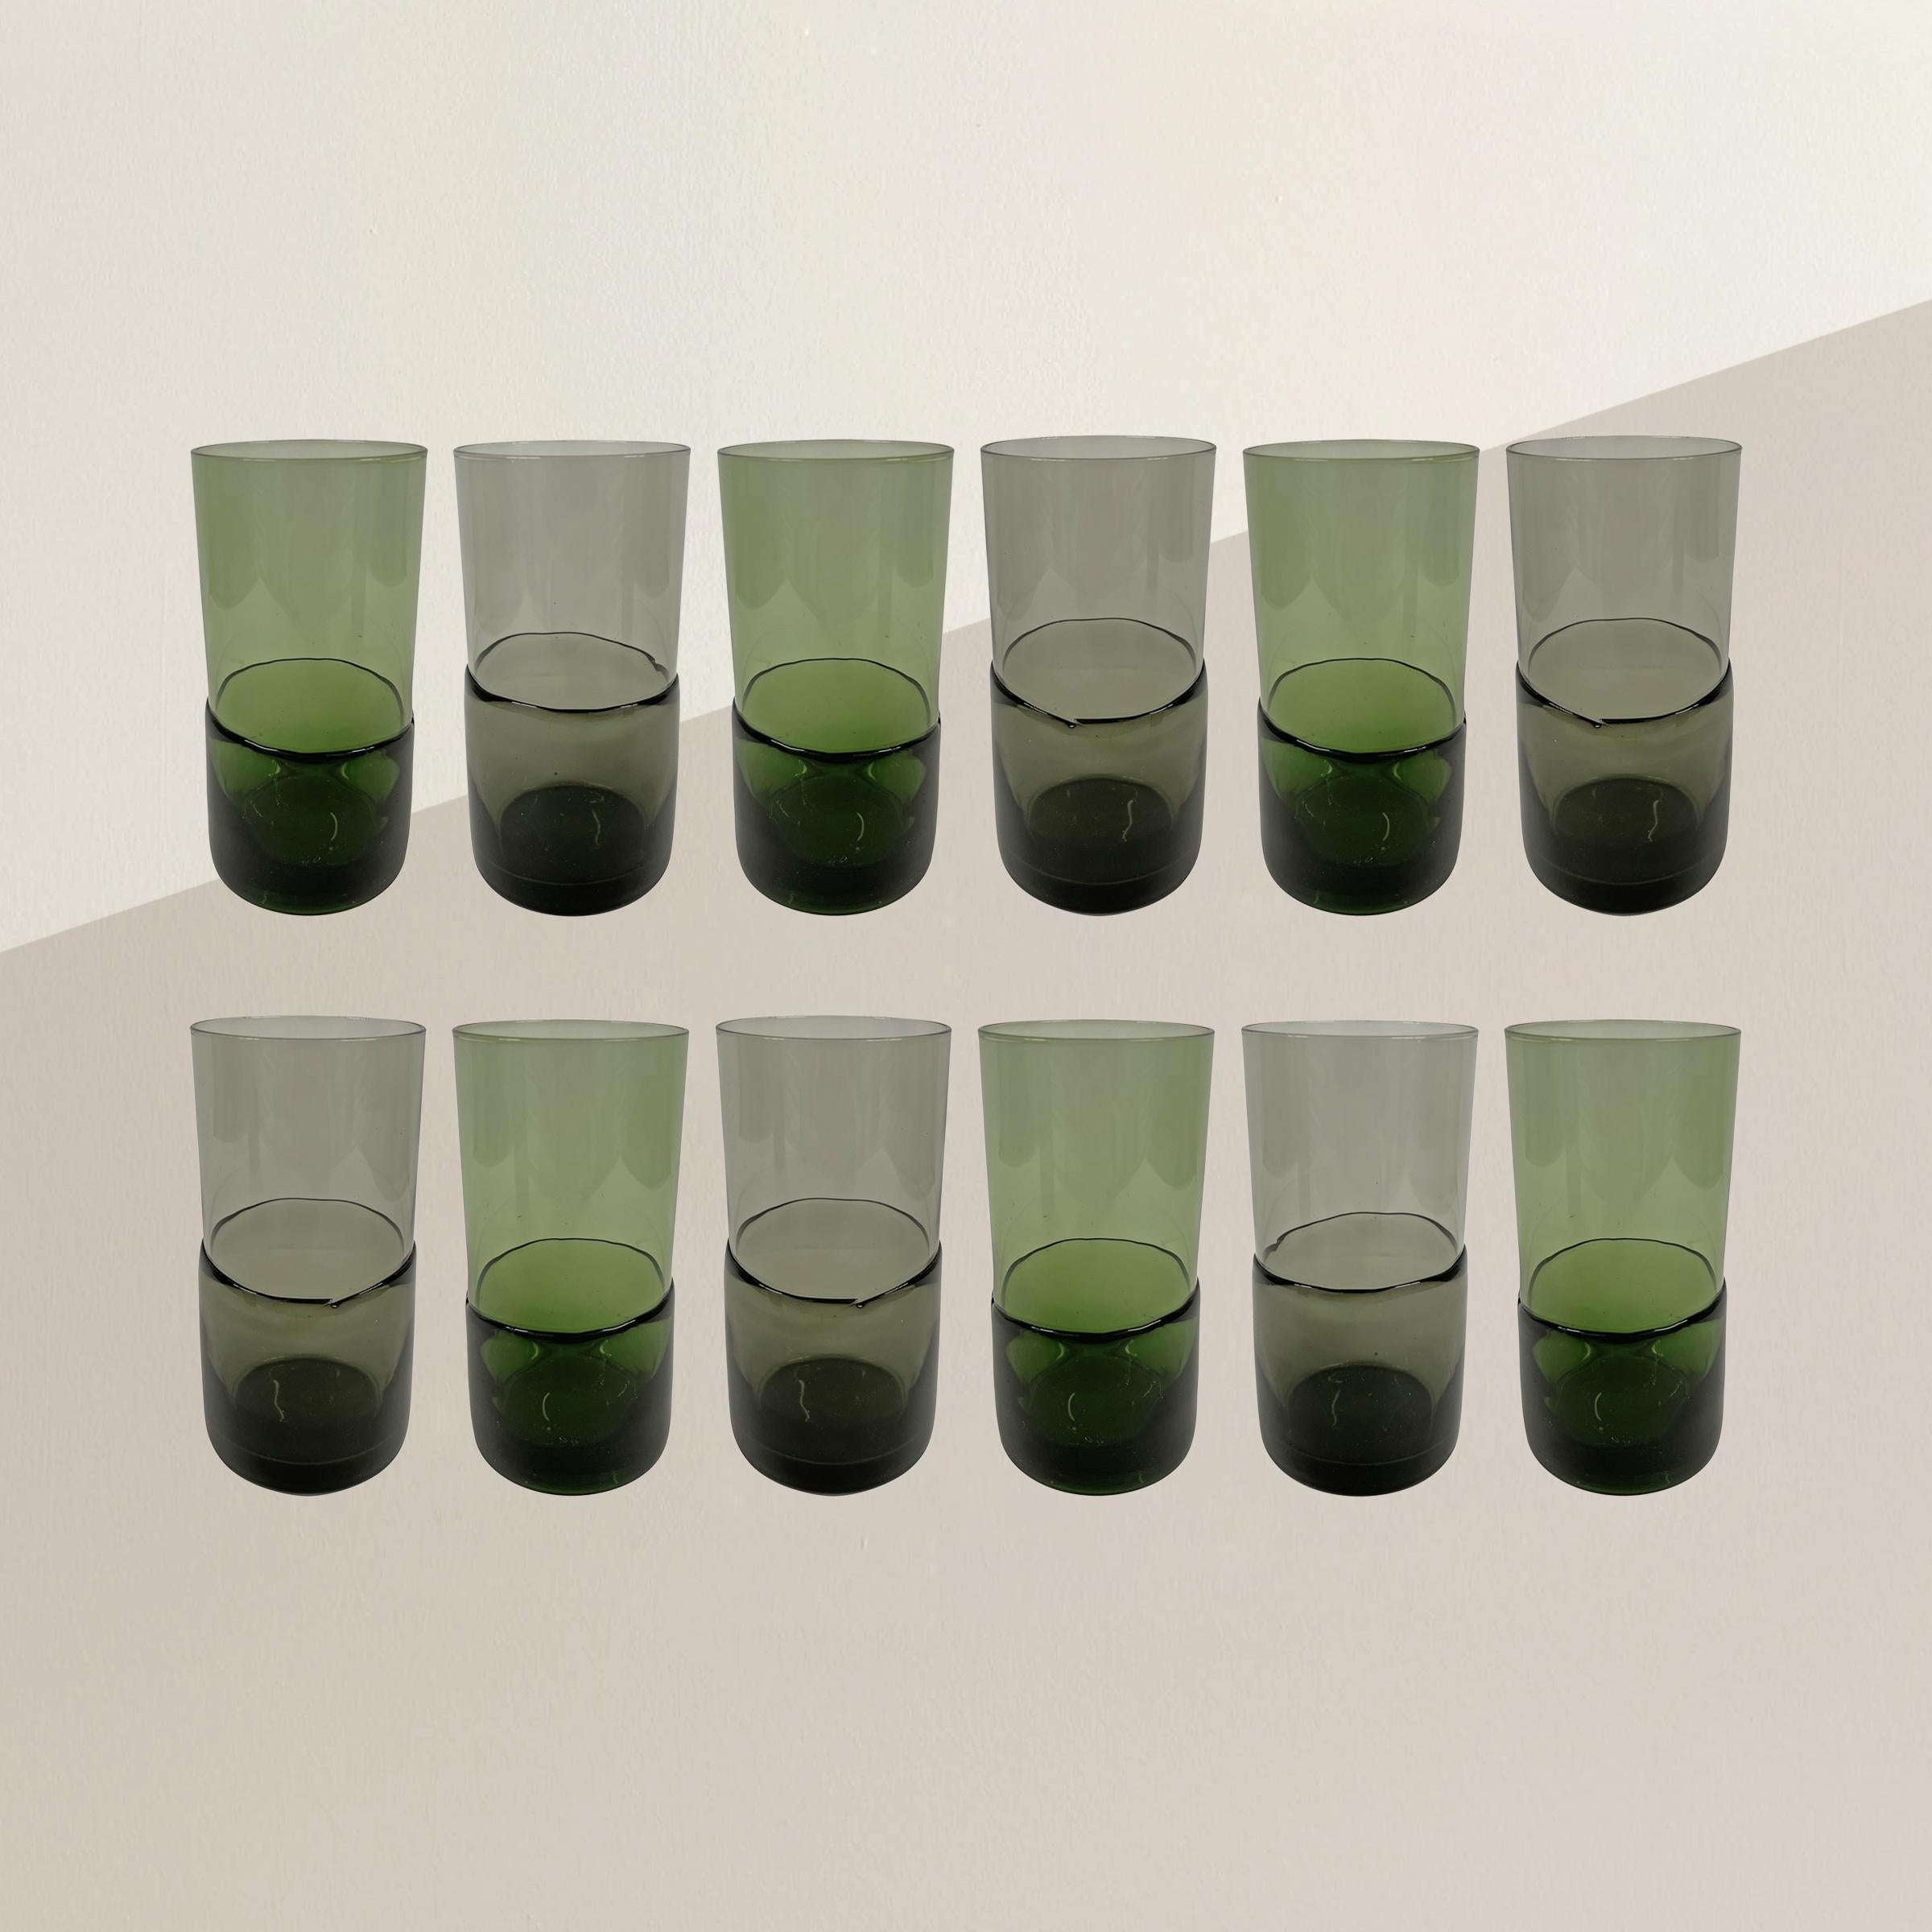 A chic set of twelve hand blown drinking glasses in varying shades of gray and green. Perfect for your next family get-together or cocktails with friends.